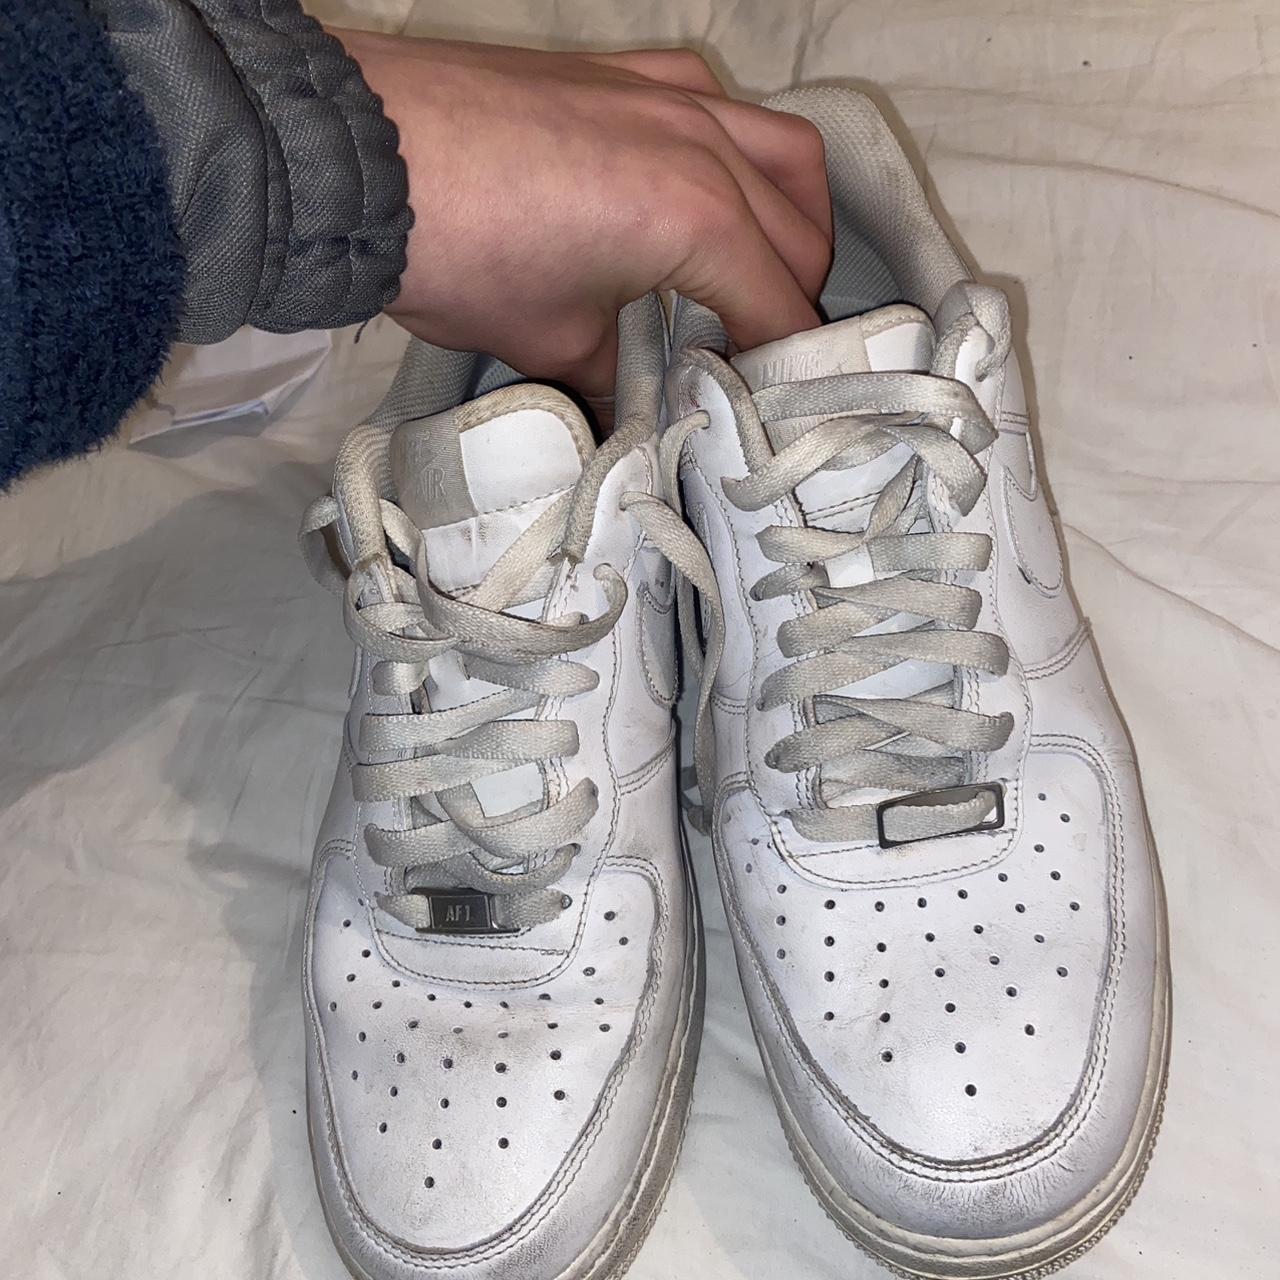 White airforces - Depop